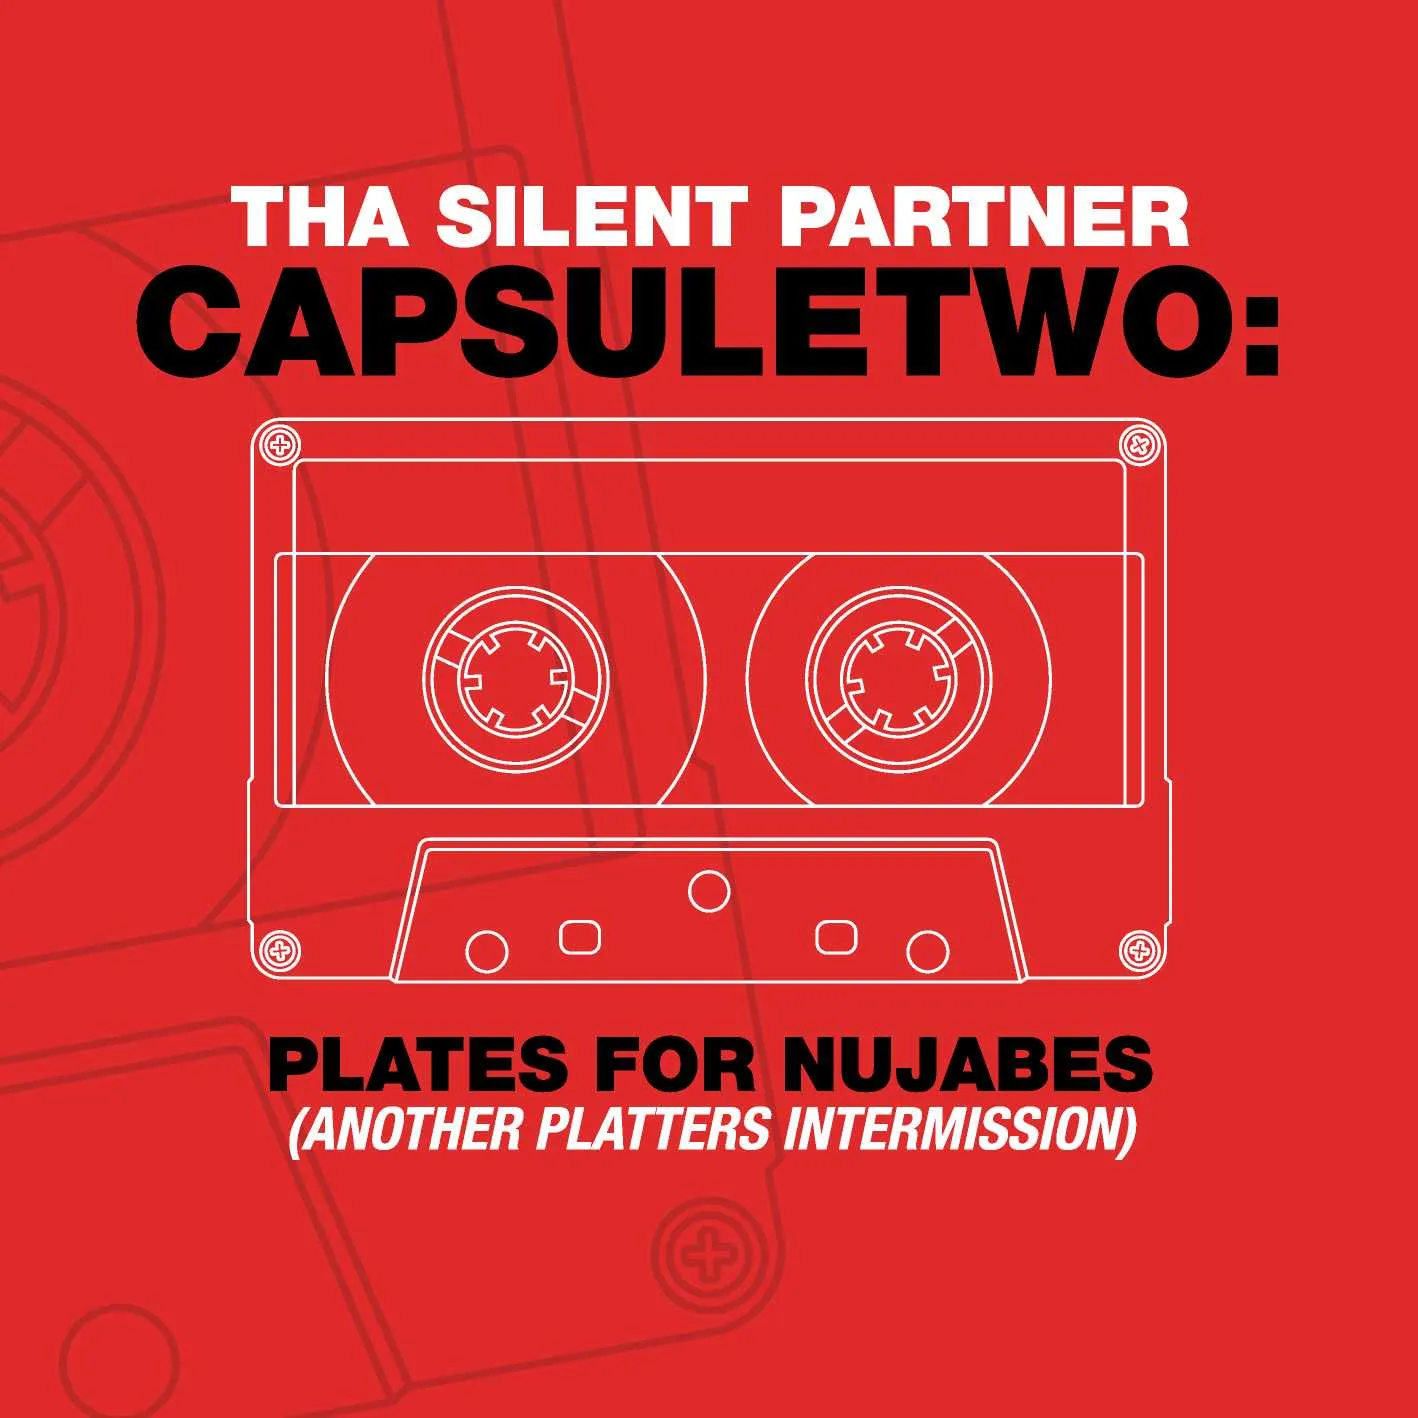 Cover of “CAPSULETWO: Plates For Nujabes (Another Platters Intermission)” by Tha Silent Partner